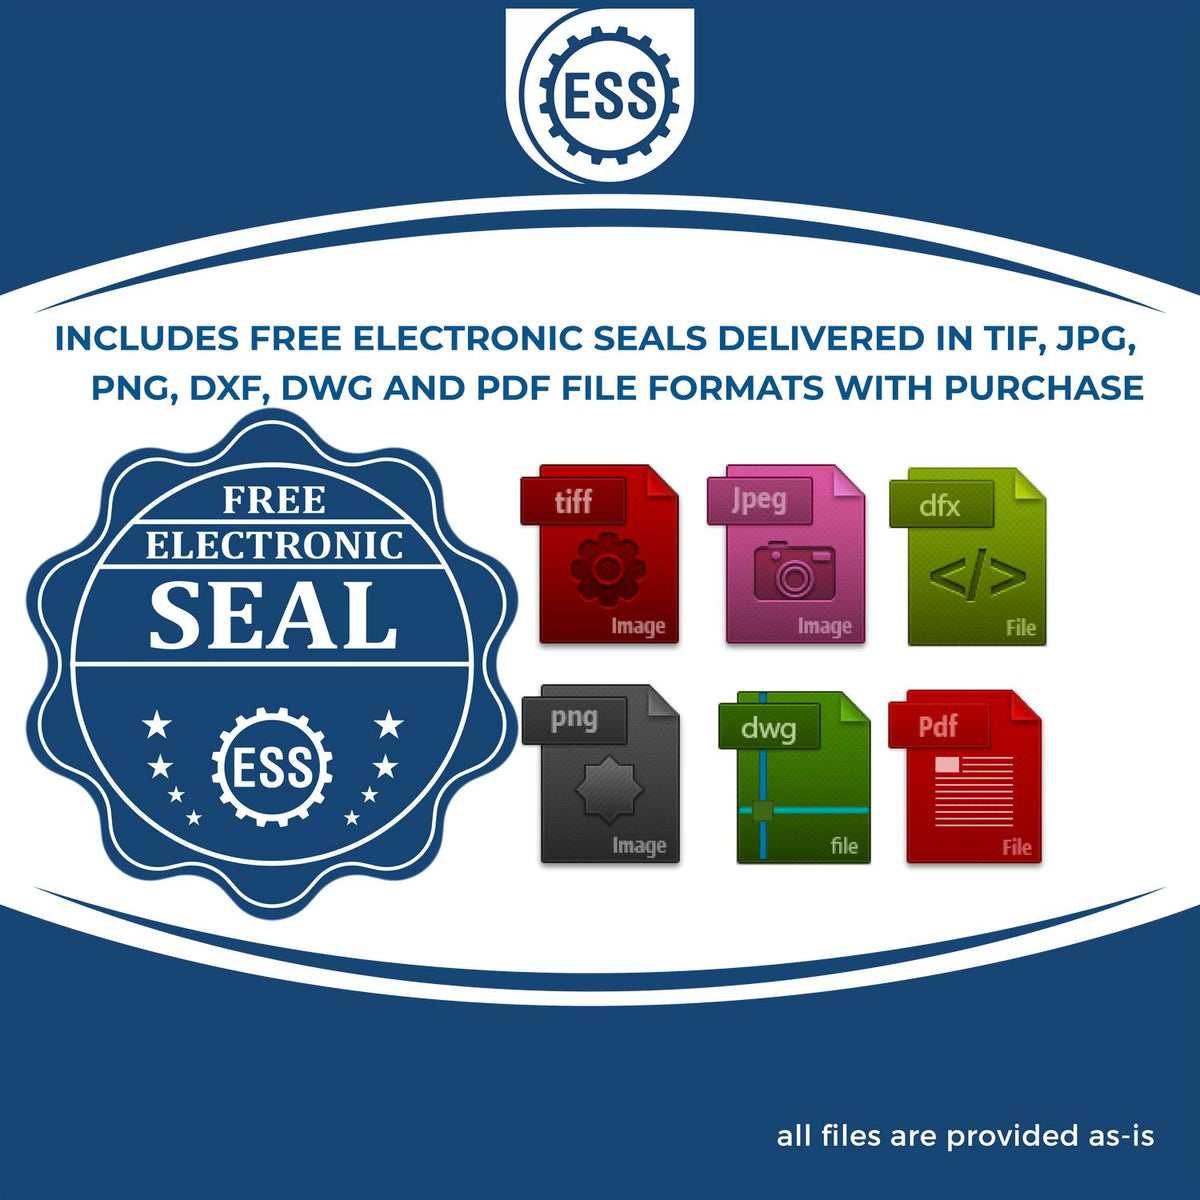 An infographic for the free electronic seal for the Slim Pre-Inked Colorado Professional Engineer Seal Stamp illustrating the different file type icons such as DXF, DWG, TIF, JPG and PNG.